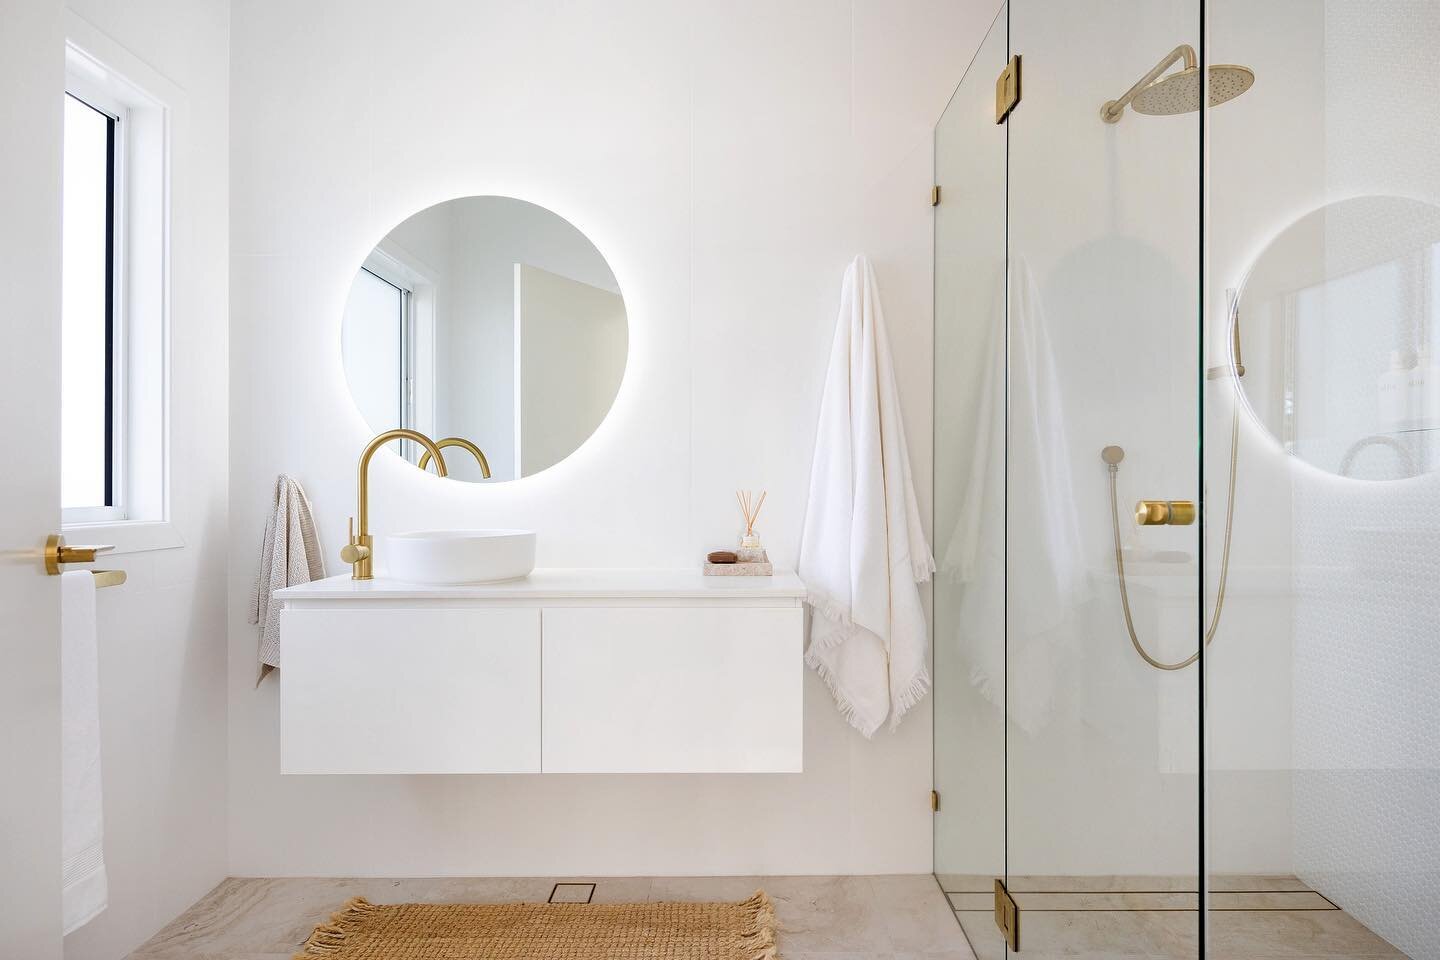 Back lit LED mirror in this stunning ensuite. 📷 @timtaplinphotography 
.
.
.
.
.
.
.
.
.
#howcroftelectricalservices #ulladullaelectrician #southcoastelectrician #electrical #mirror #LEDmirror